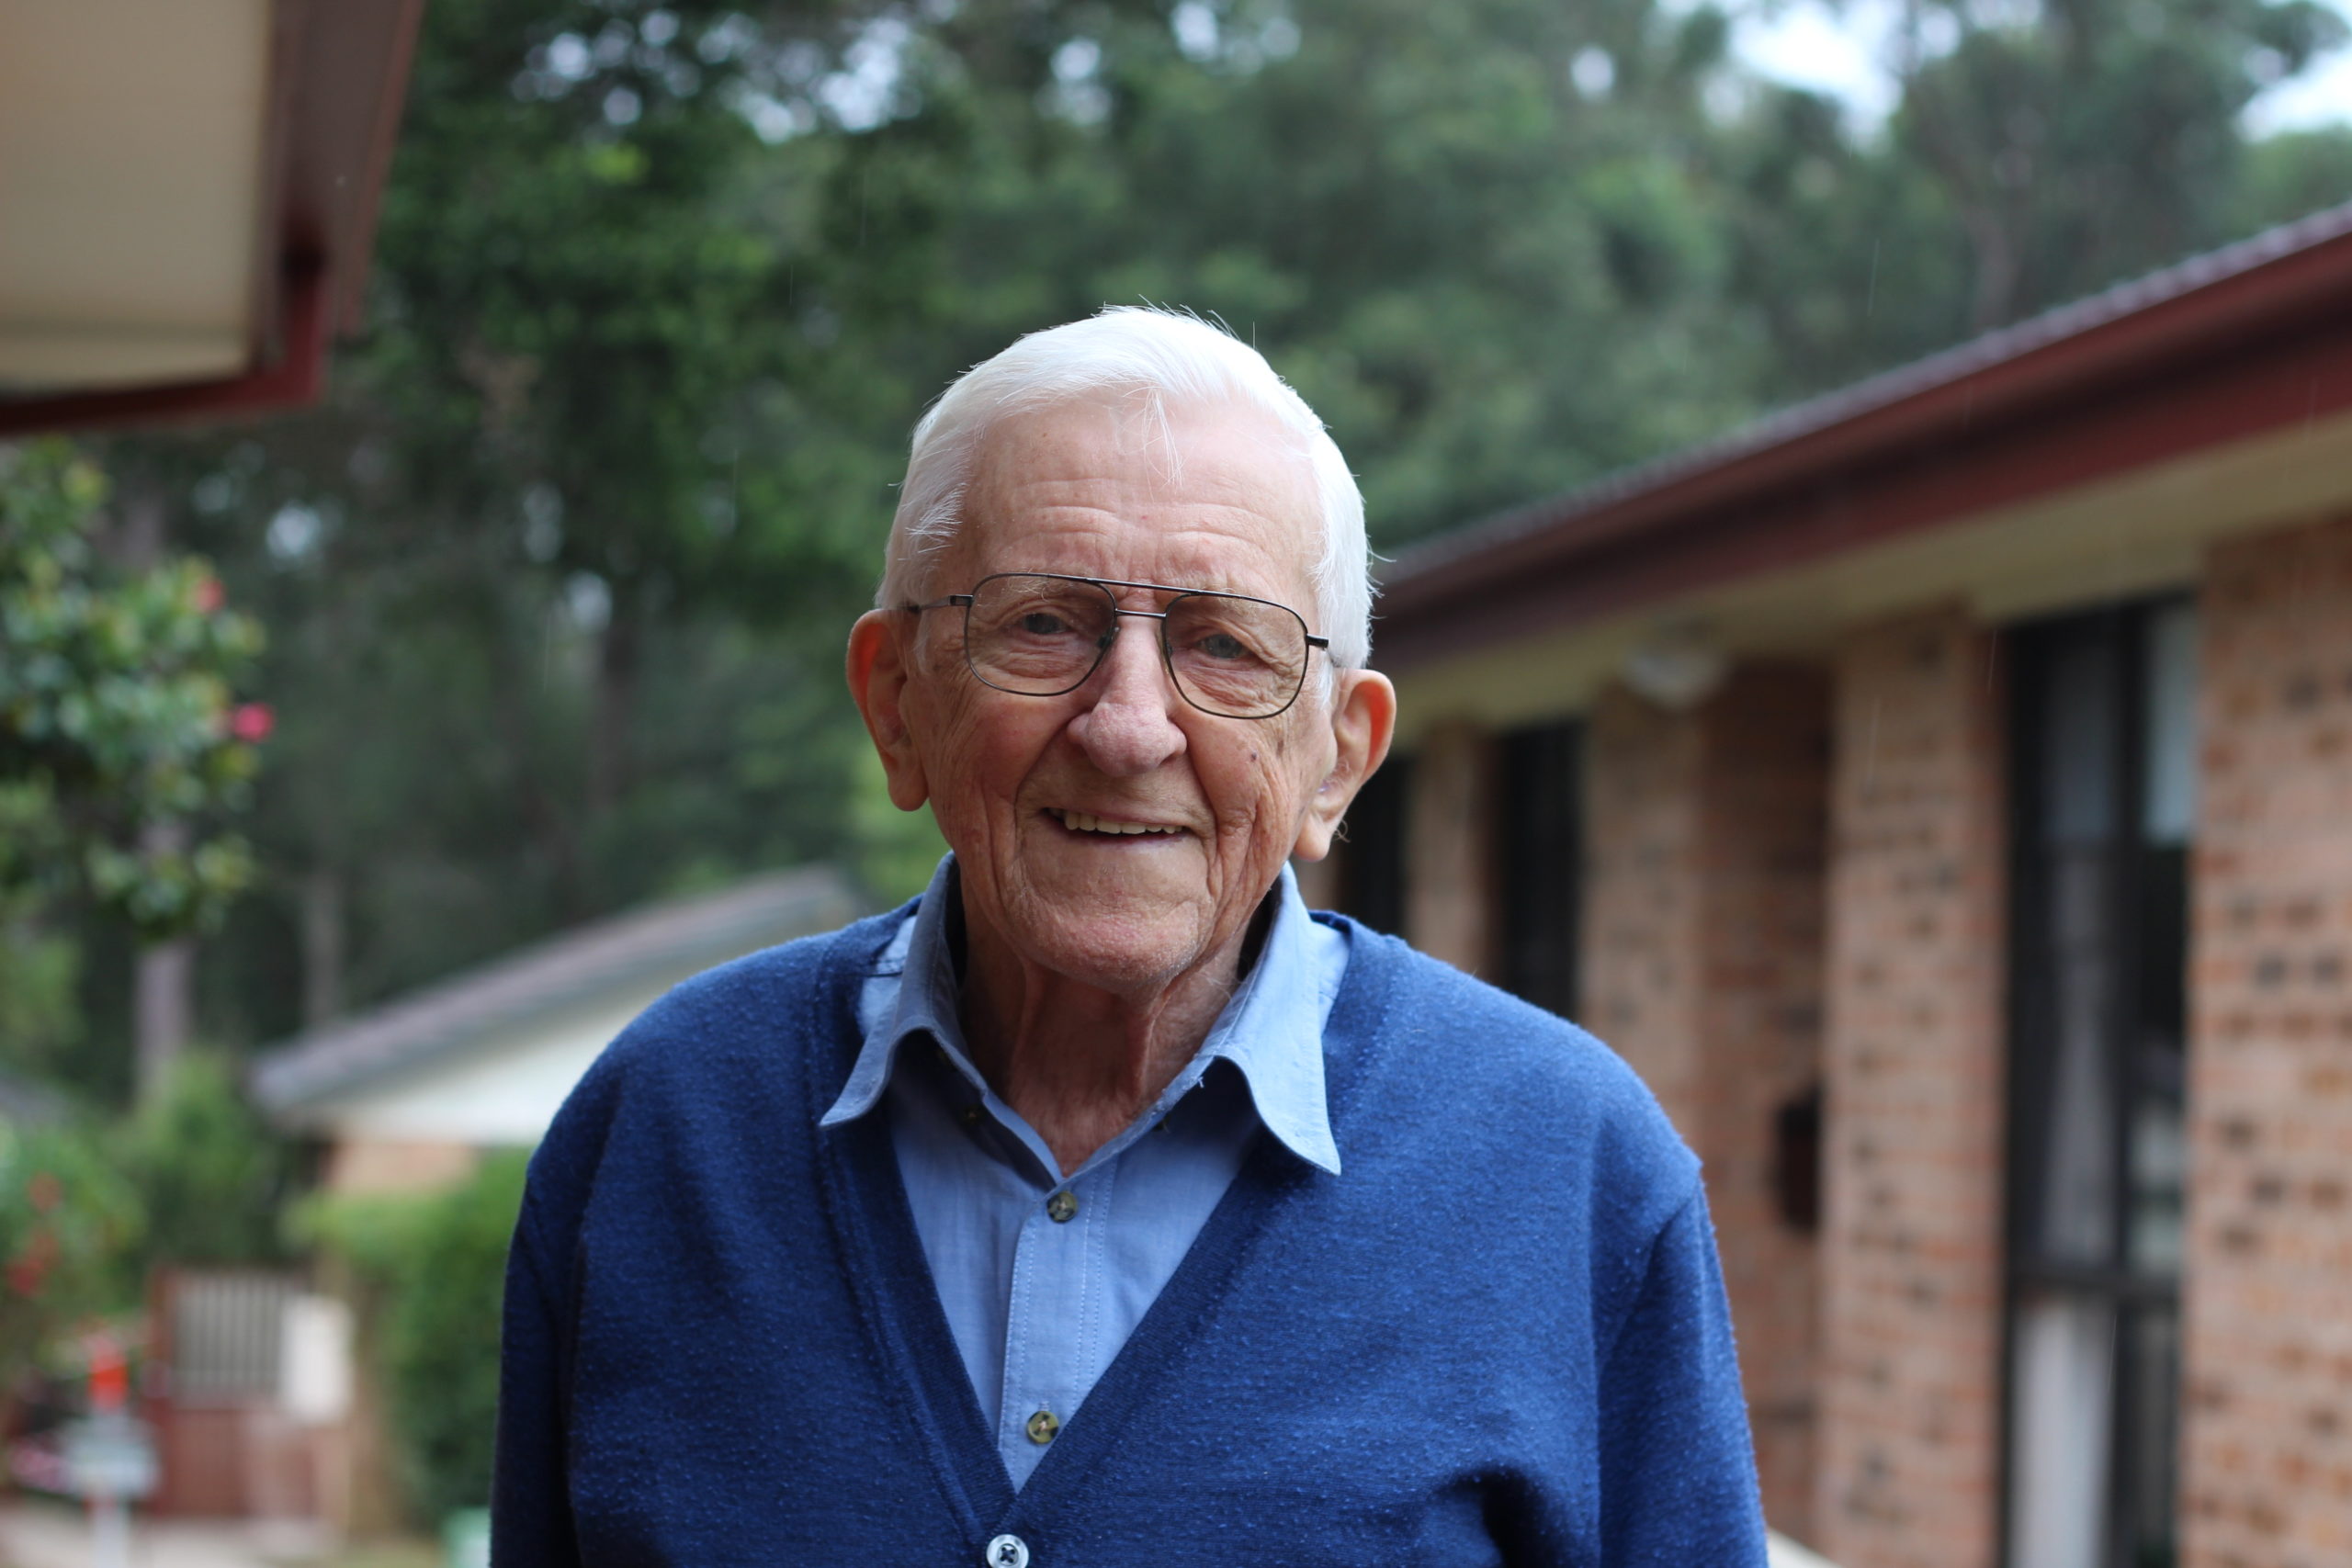 Dick-Udy-7-Aug-2020-scaled | RSL LifeCare - provide care and service to war veterans, retirement villages and accommodation, aged care services and assisted living